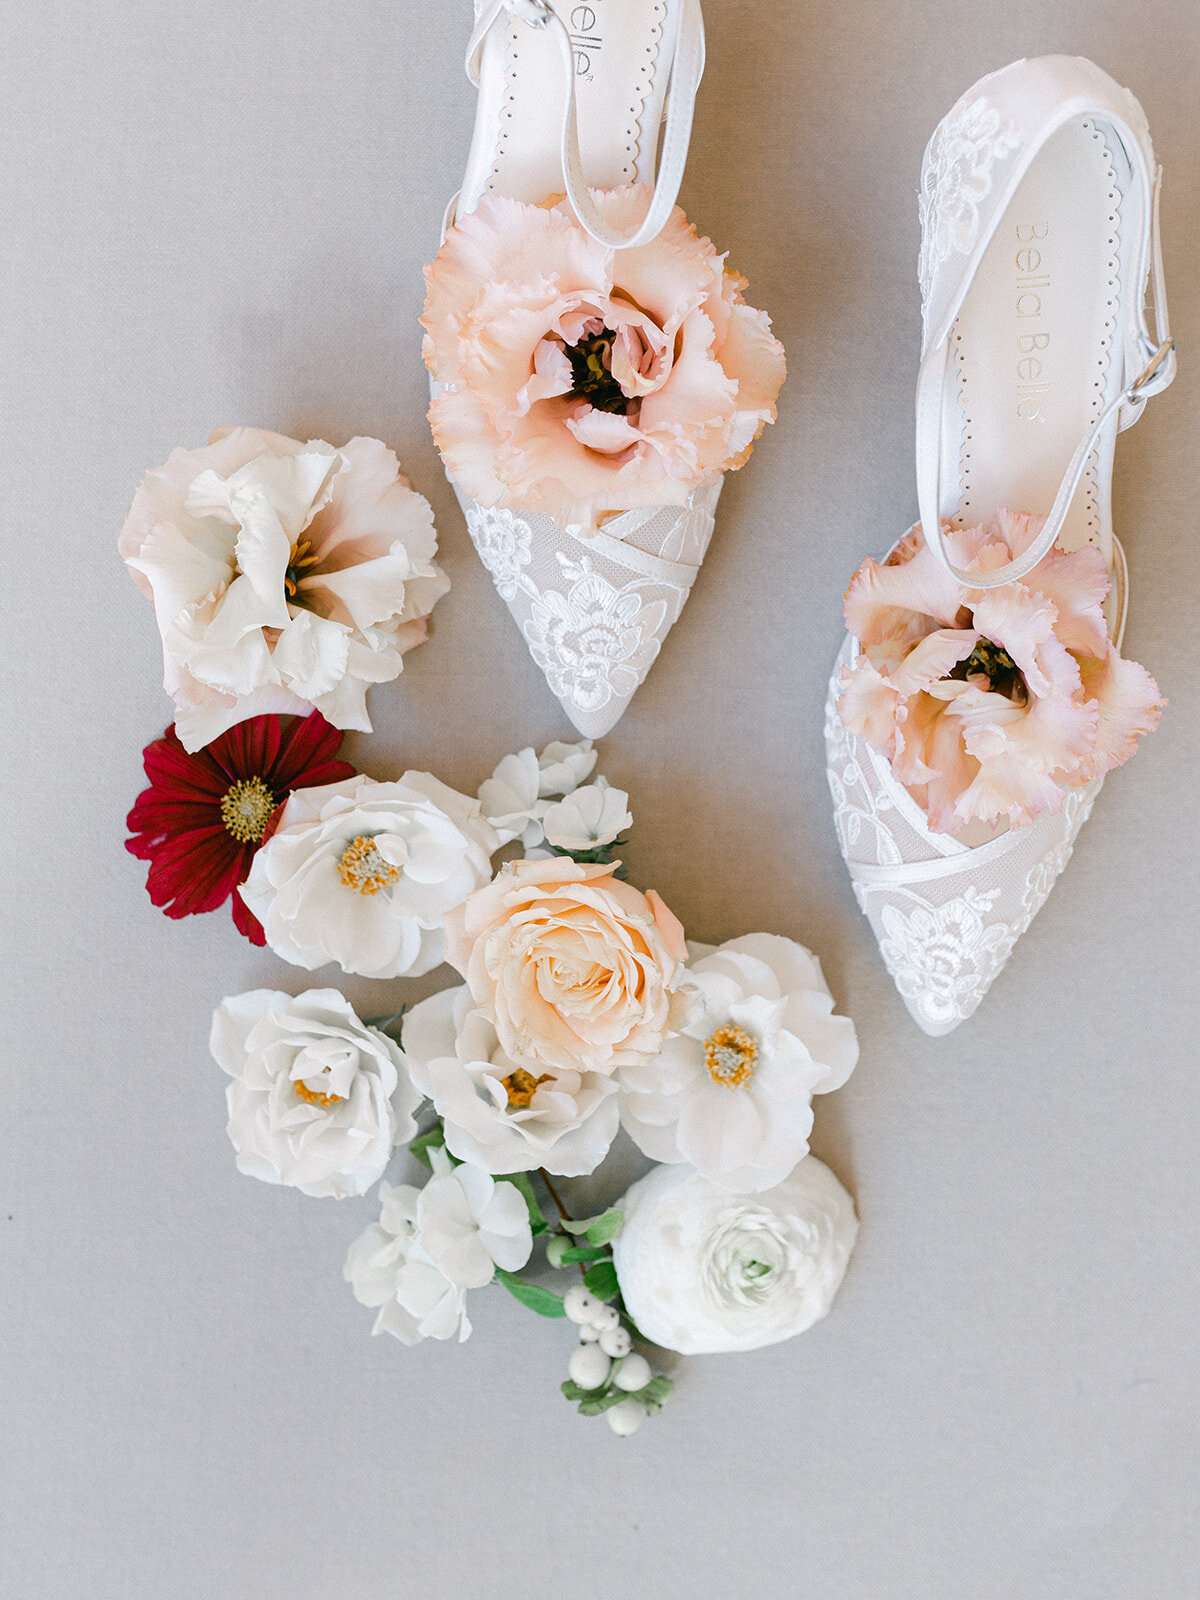 Inns of Aurora Verve Event Co. White Shoes Wedding Shoes Pistil and Pollen Coryn Kiefer Photography - A + D Wedding -71